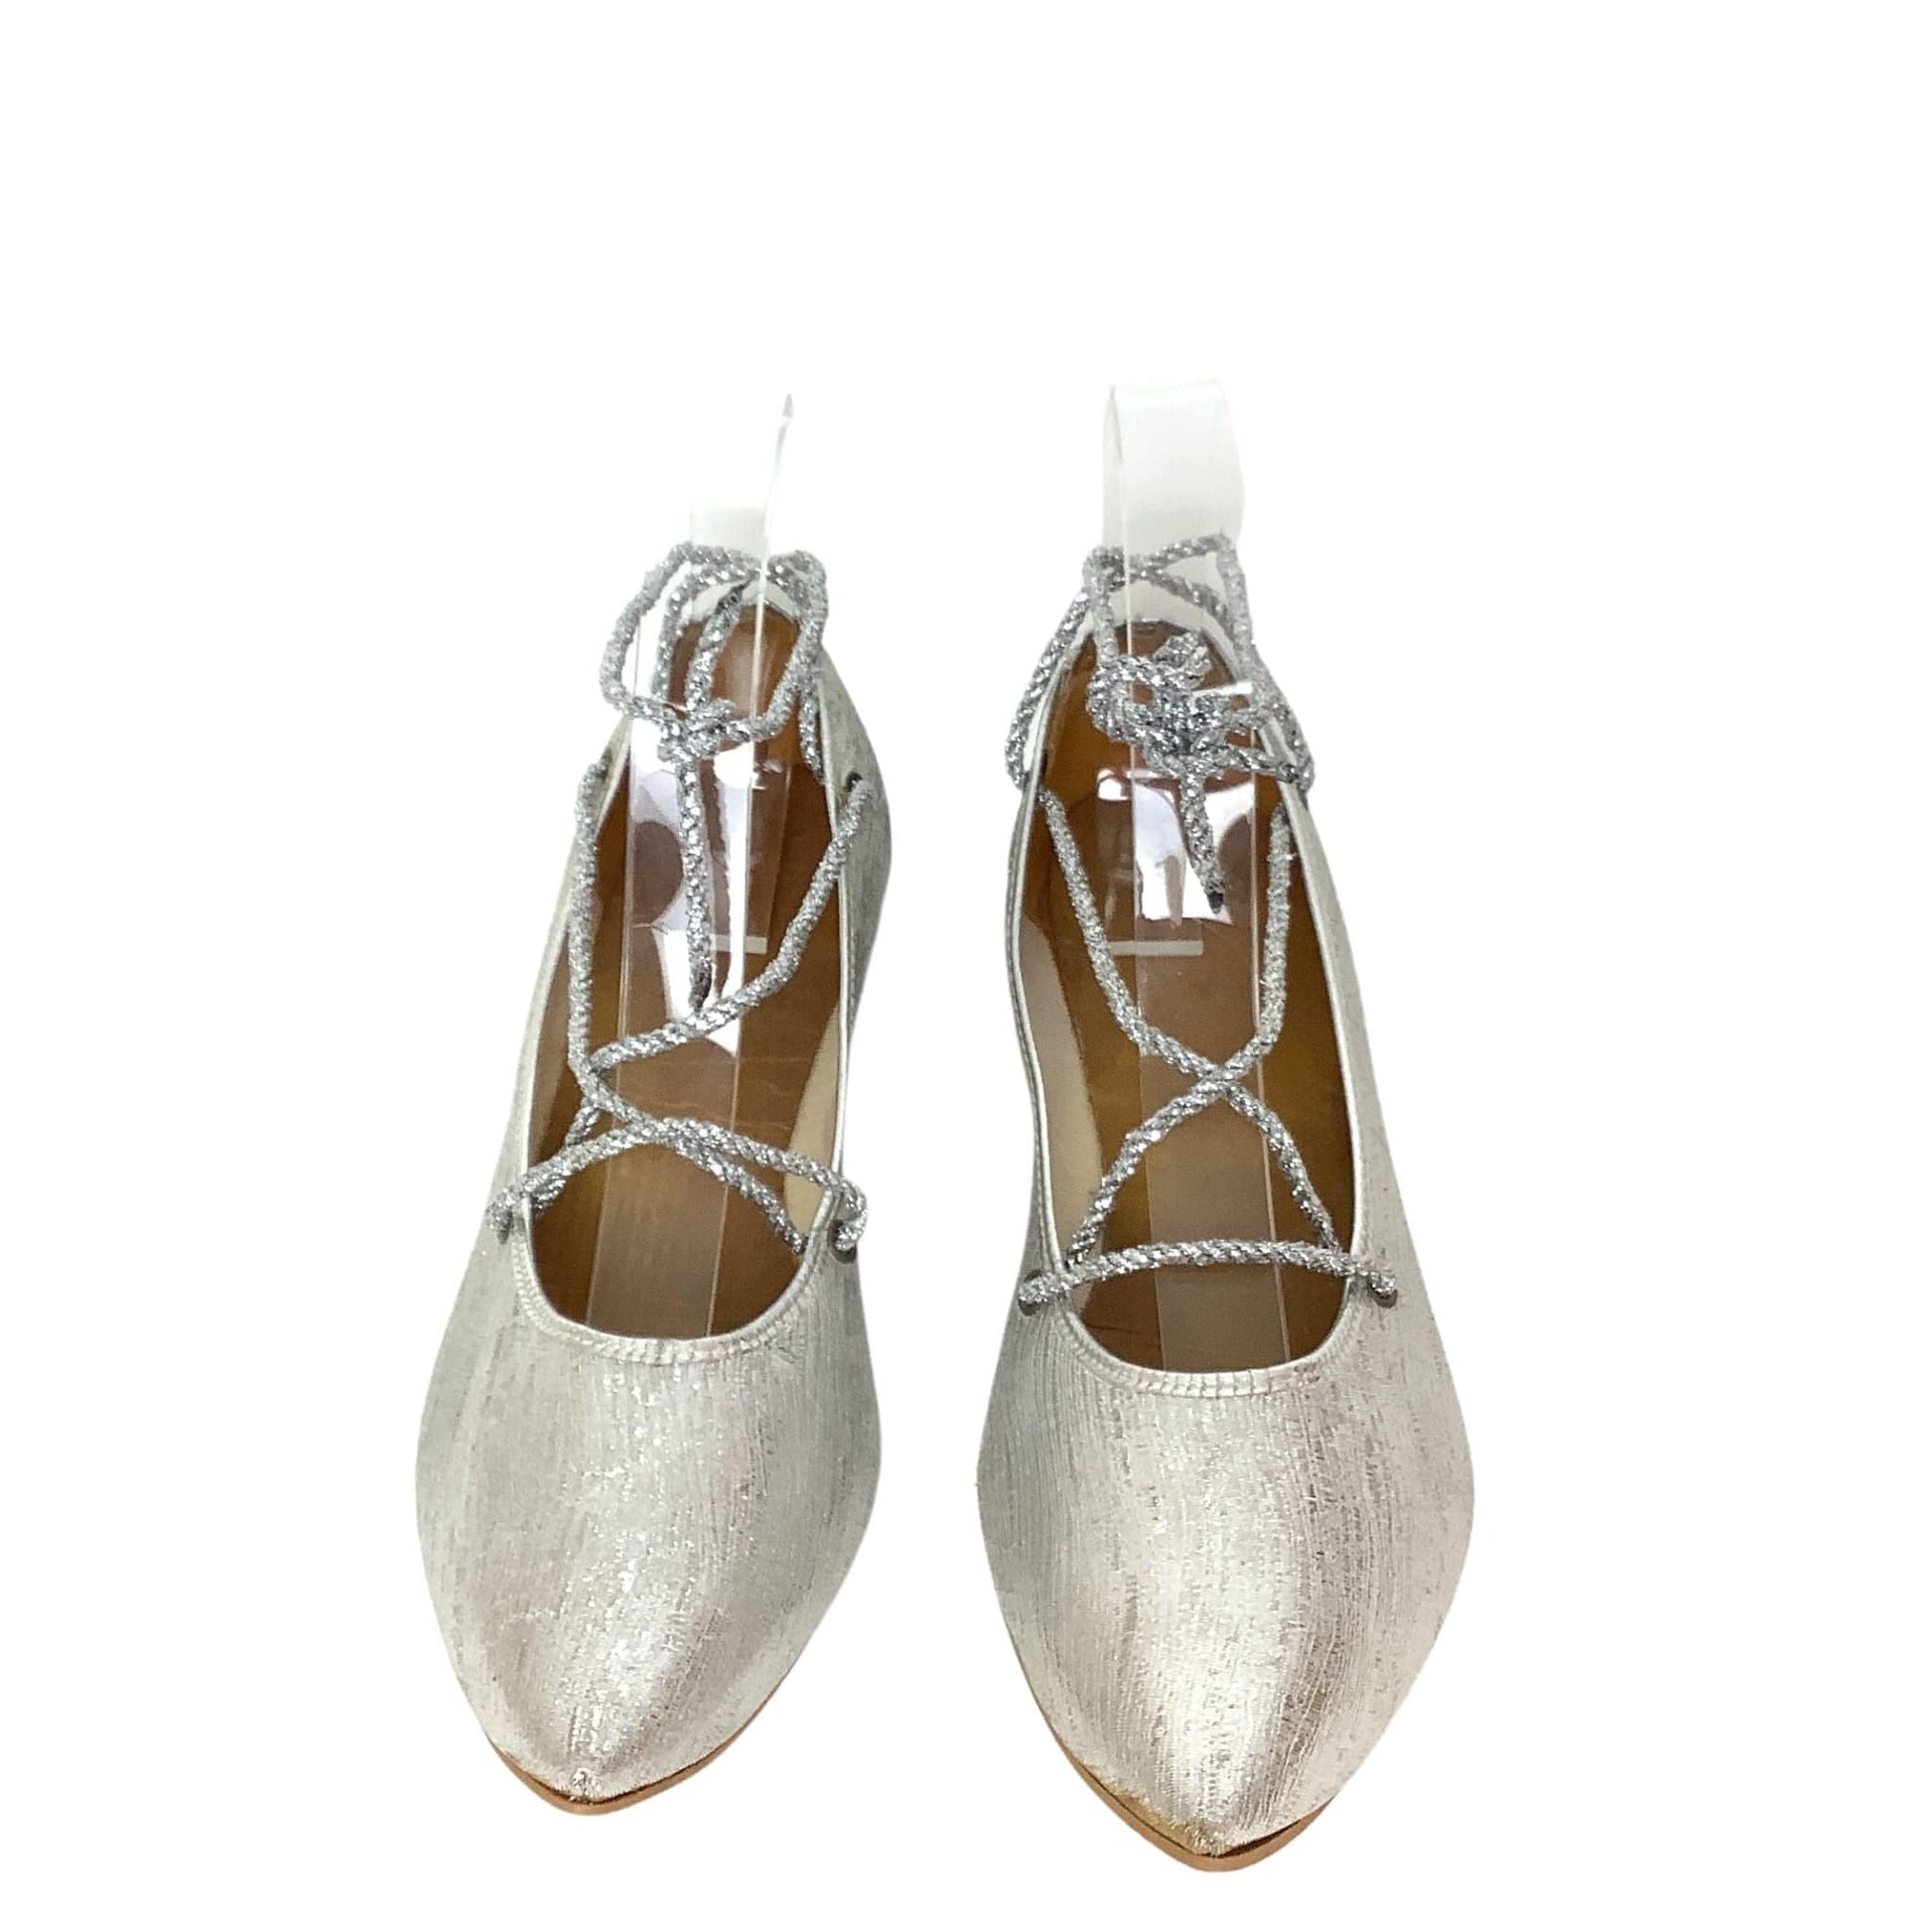 Metallic Silver Laced Flats 7 / Silver / Vintage 1950s